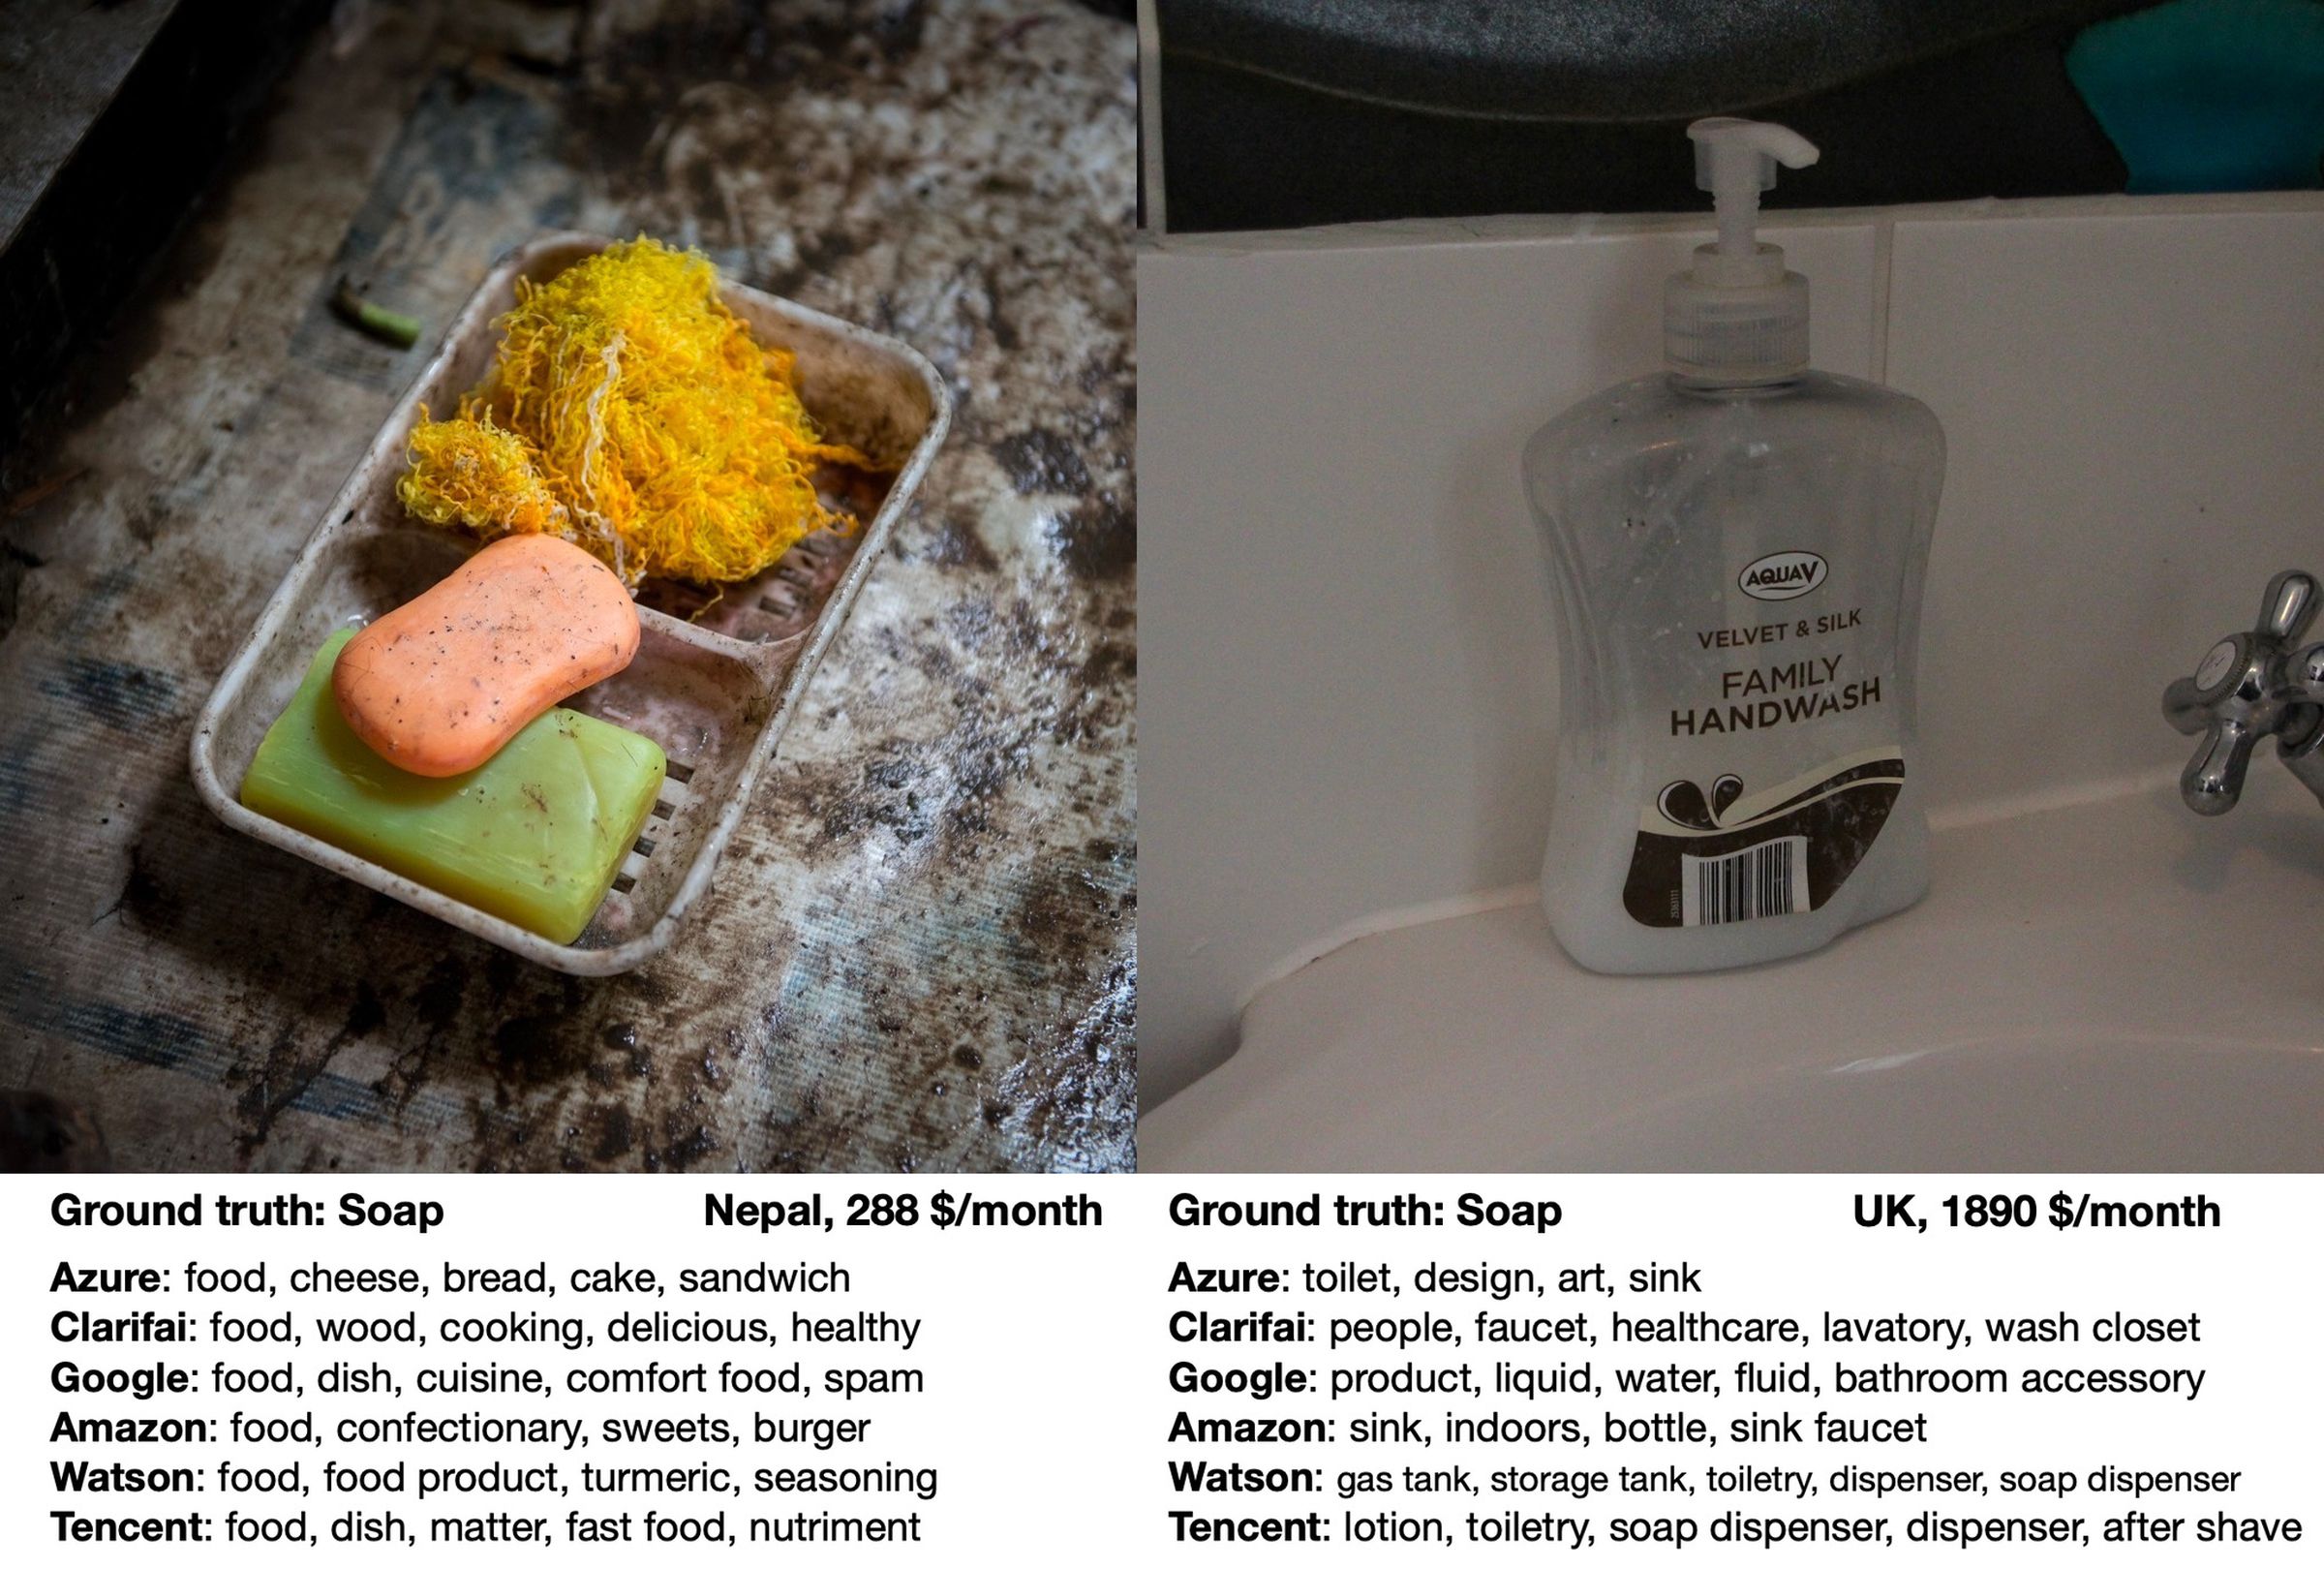 Sample images of “soap” from the dataset and the guesses from different commercial object recognition algorithms. 